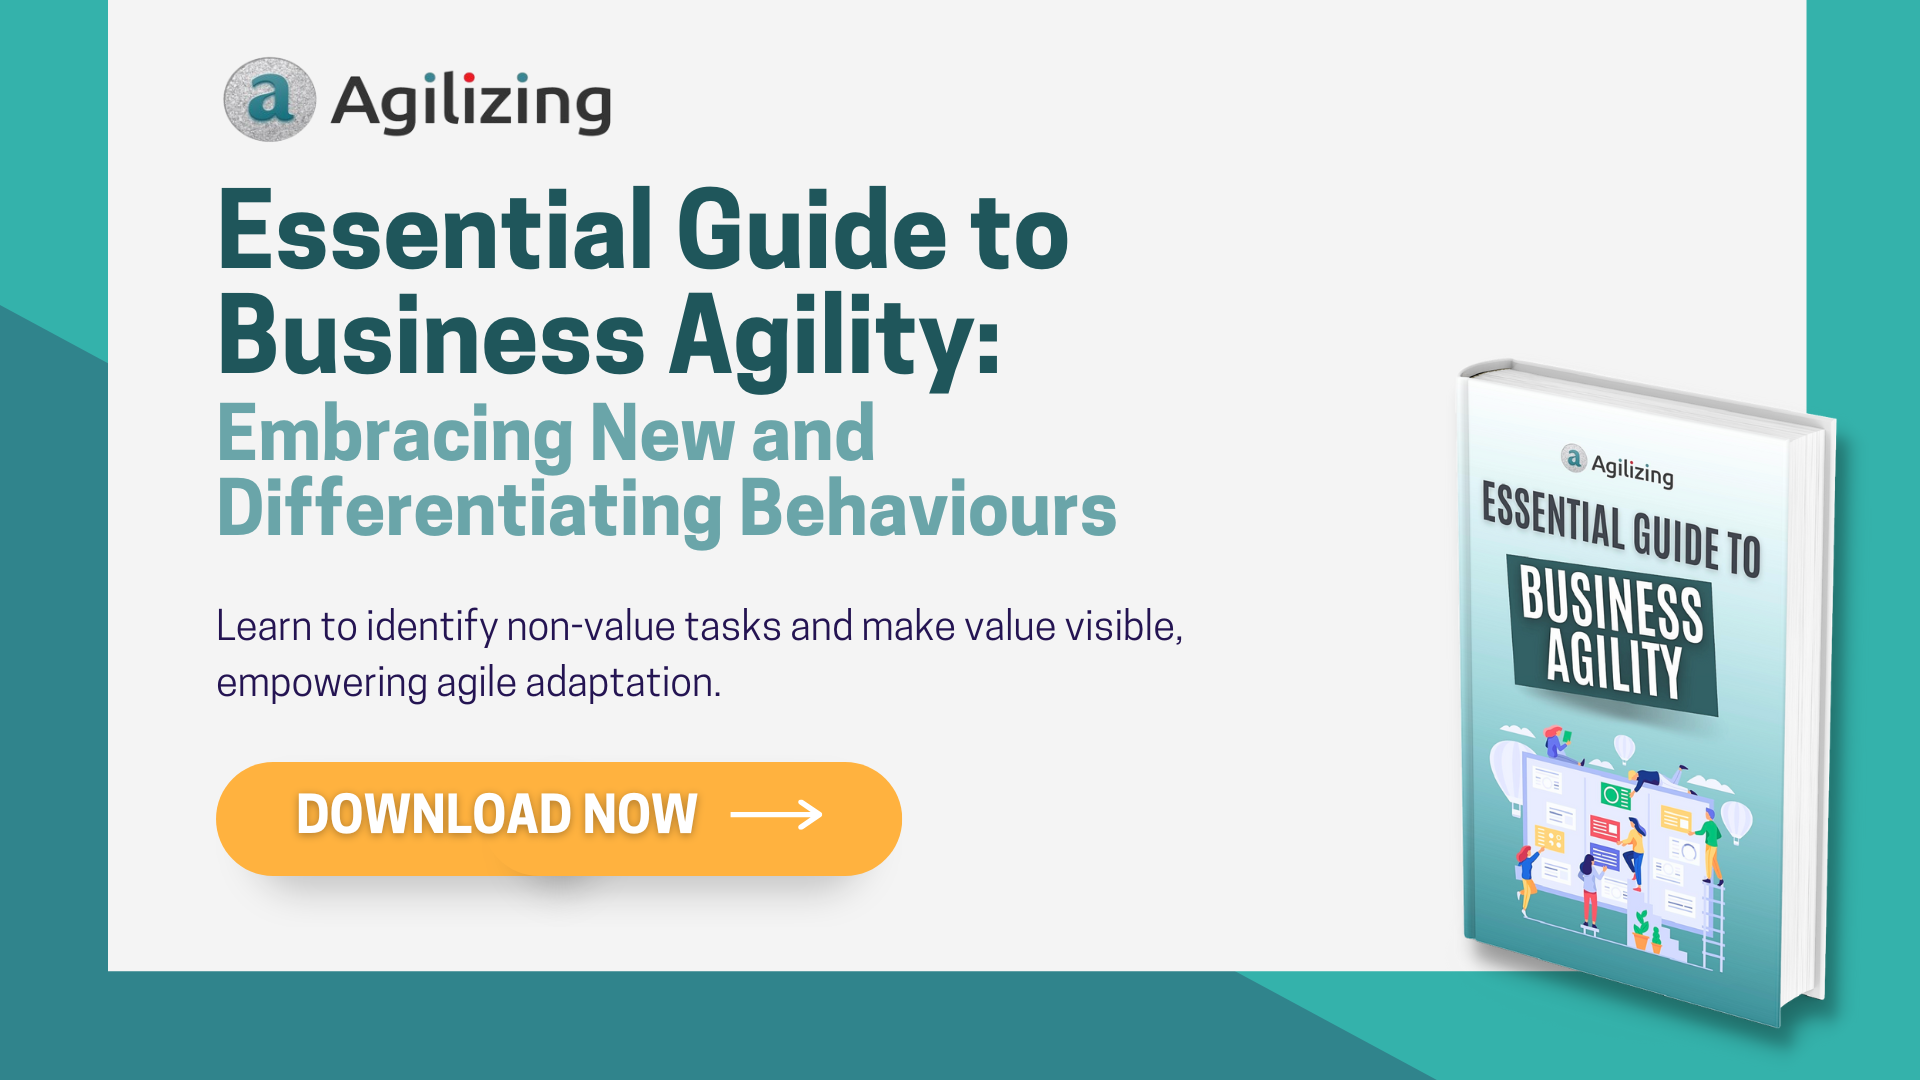 Essential Guide to Business Agility_P.12_ENG_Agilizing